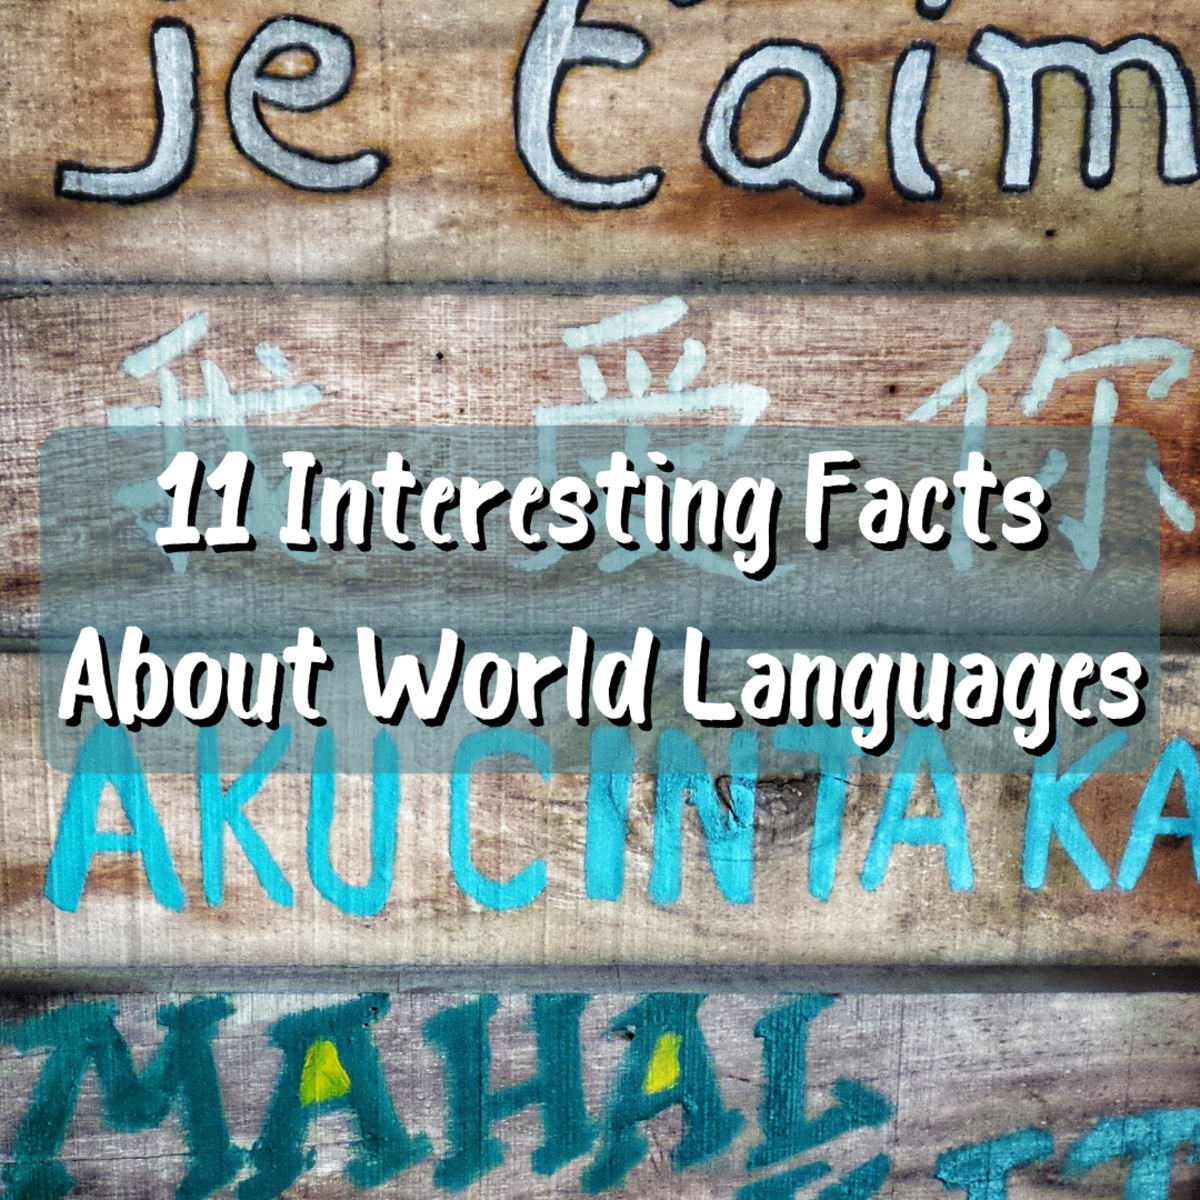 11 Interesting Facts About World Languages